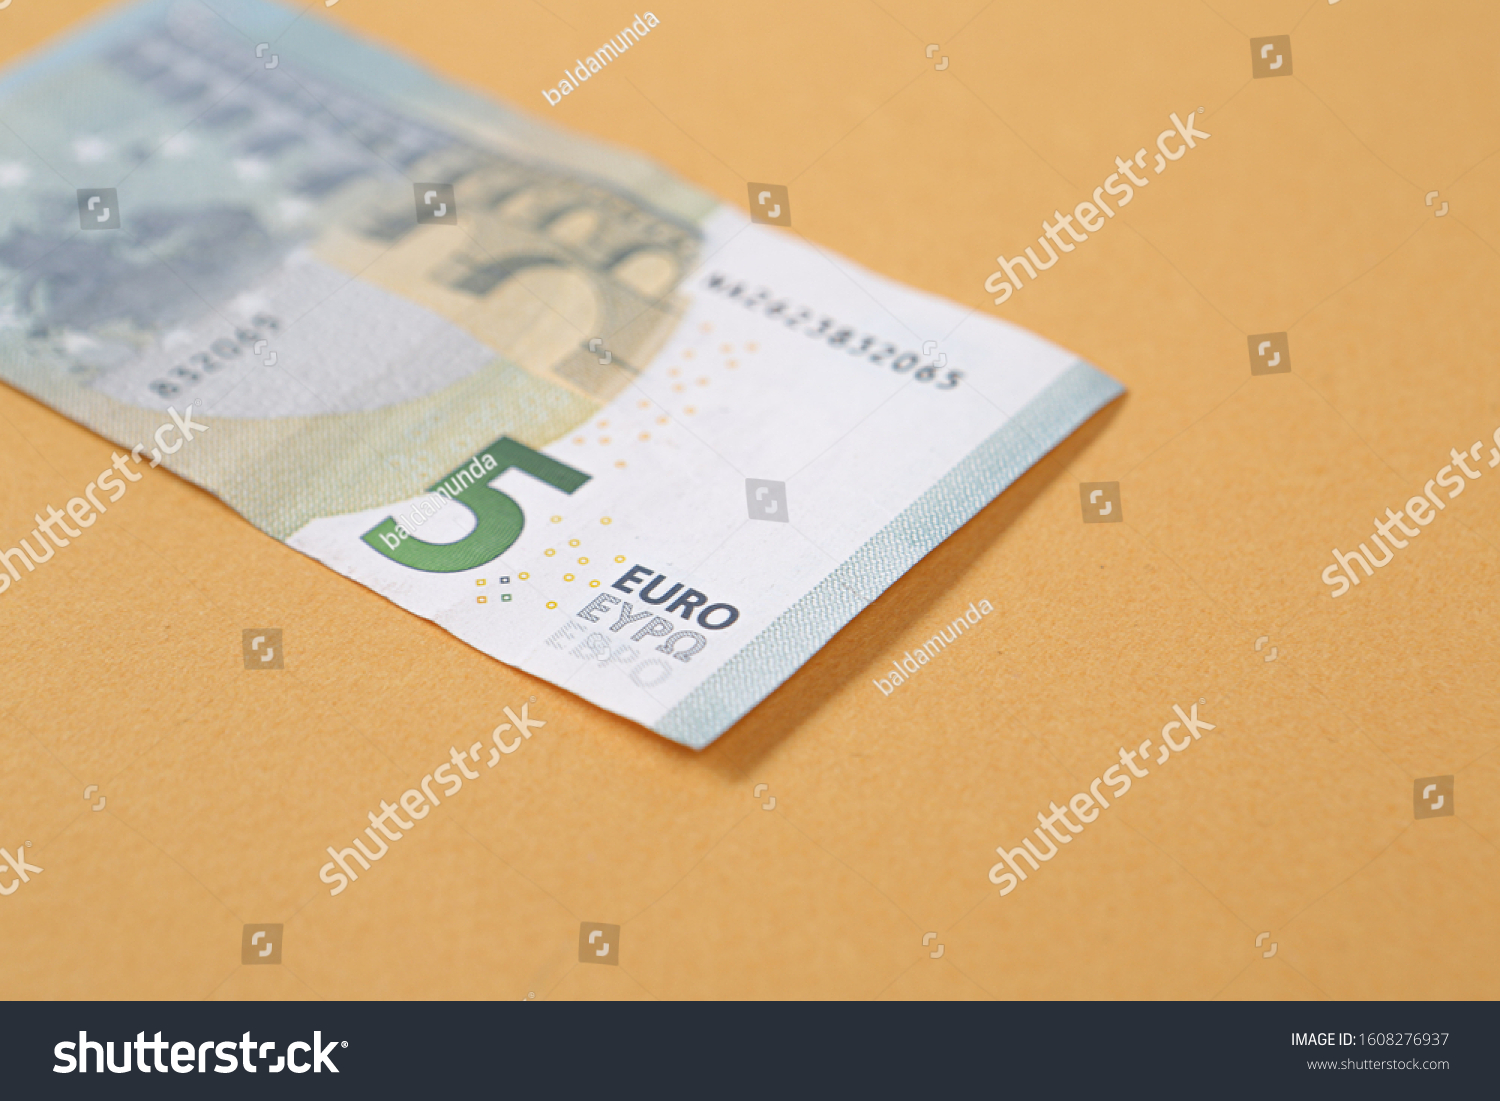 European currency money, euro banknotes #1608276937